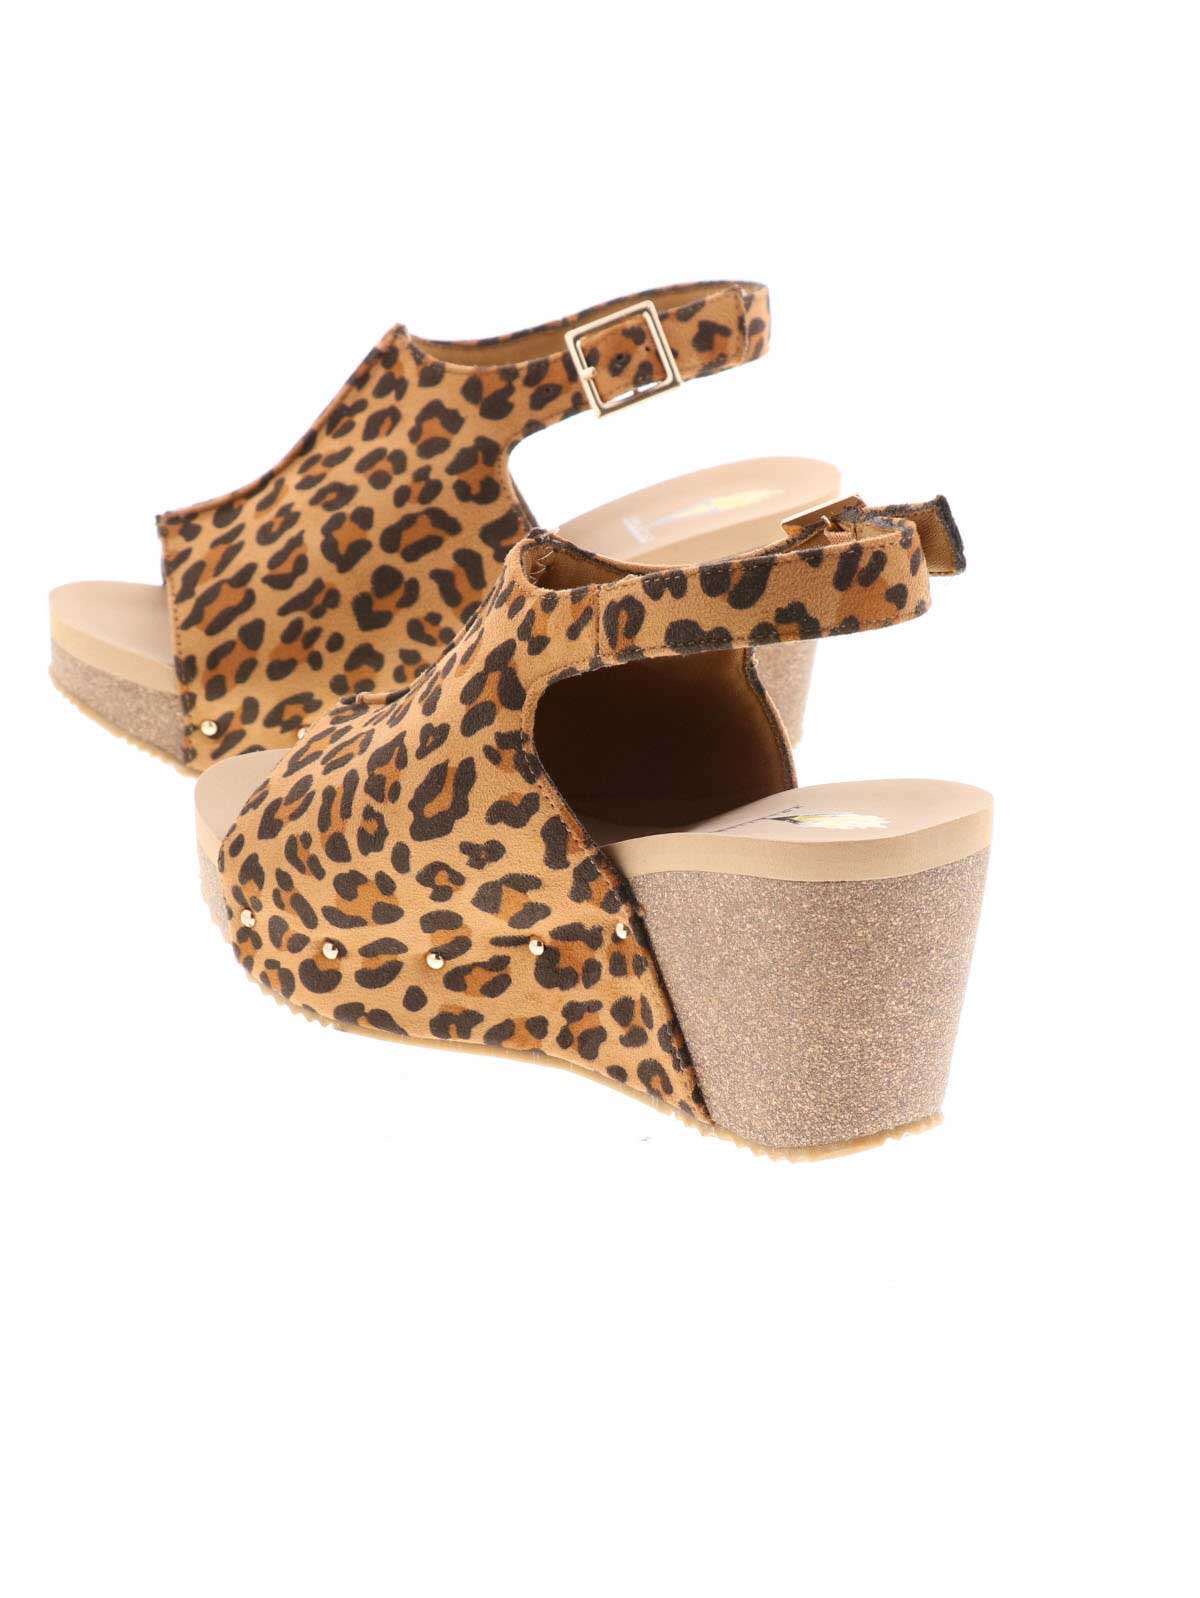 One of Volatile’s classic signature styles, the leopard Division wedge sandal brings ultra-comfort to casual fashion like no other. The adjustable ankle strap offers stability, the padded lining and signature ultra-comfort EVA insole keeps feet feeling rested even after a full day of adventure, and the rubber traction outsole means these are safe for walking on any surface. Pack these for your next trip to wear with shorts for sightseeing and a flowy dress for special events.4